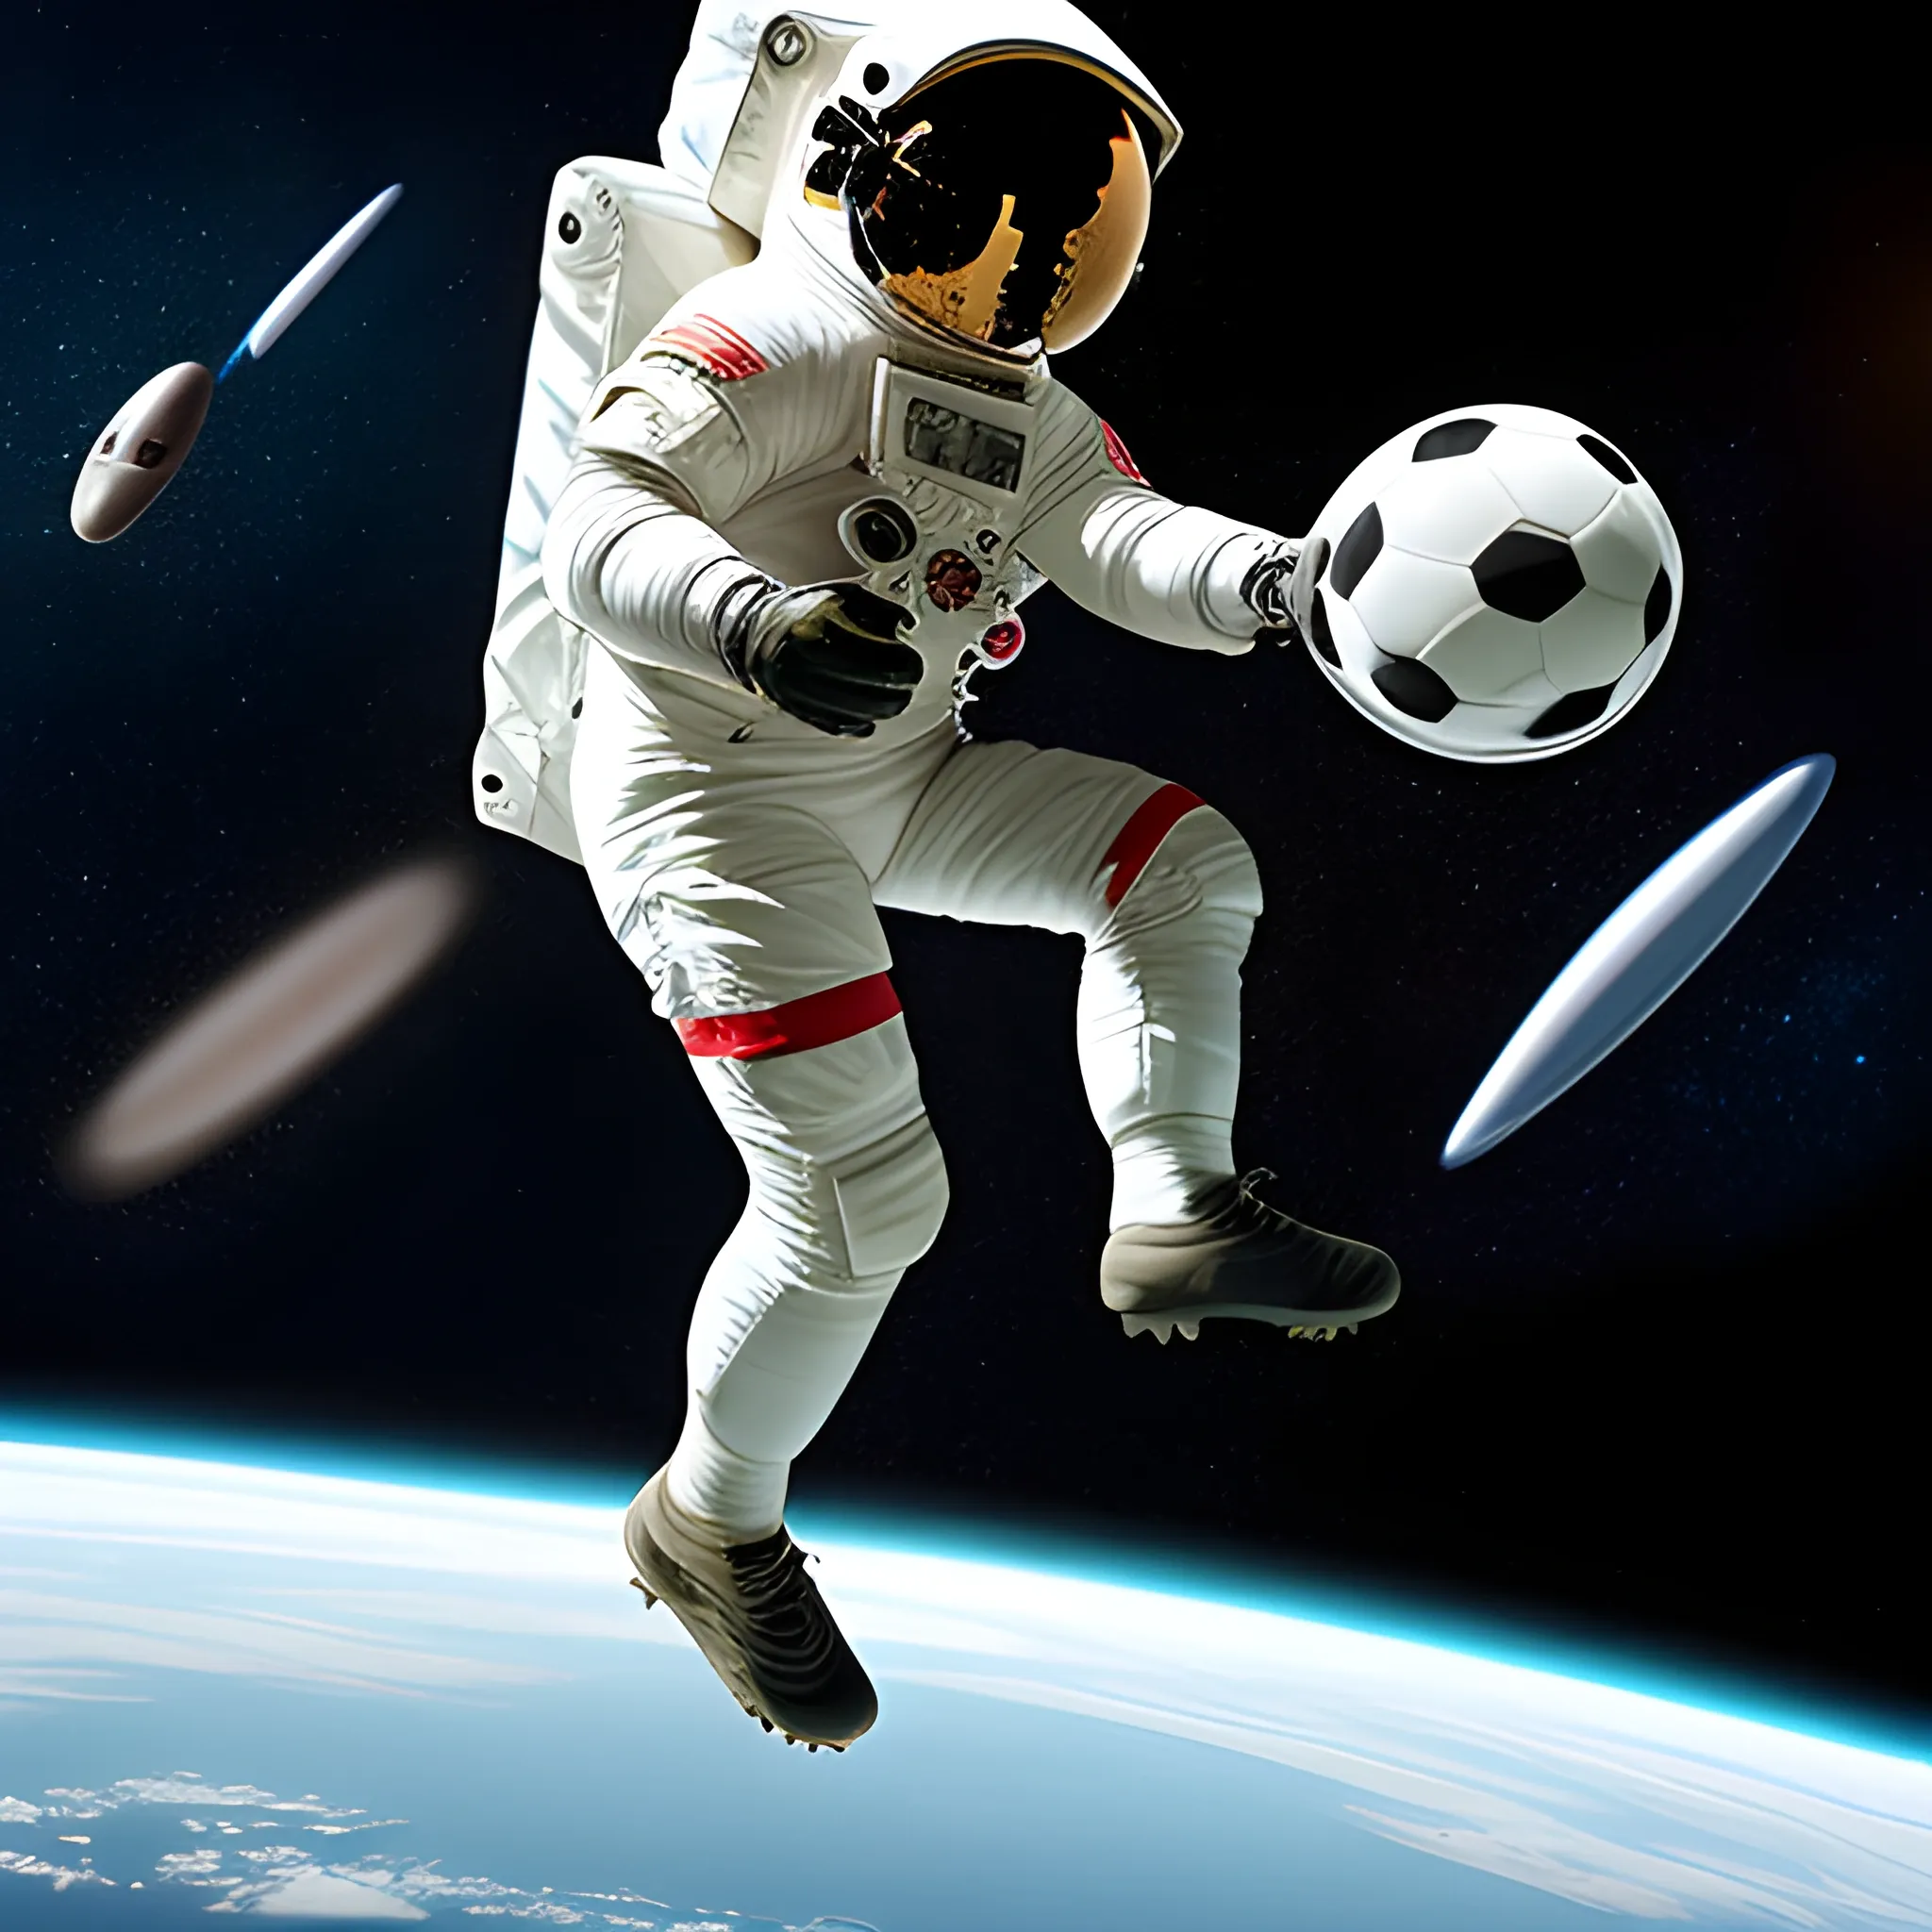 a astronaut playing with a soccer ball in a space floating
